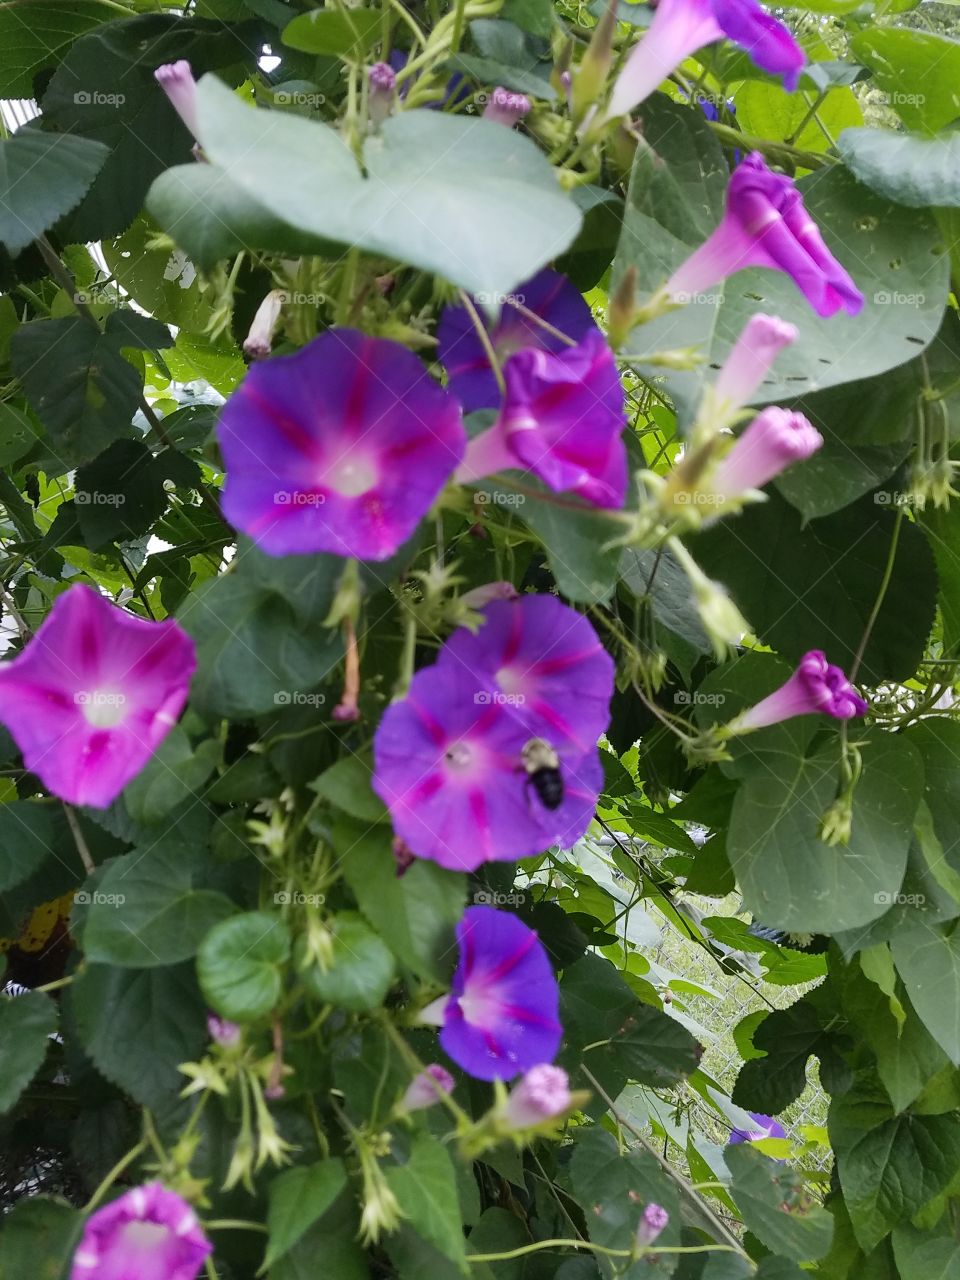 Bumble bee visits morning glory flowers